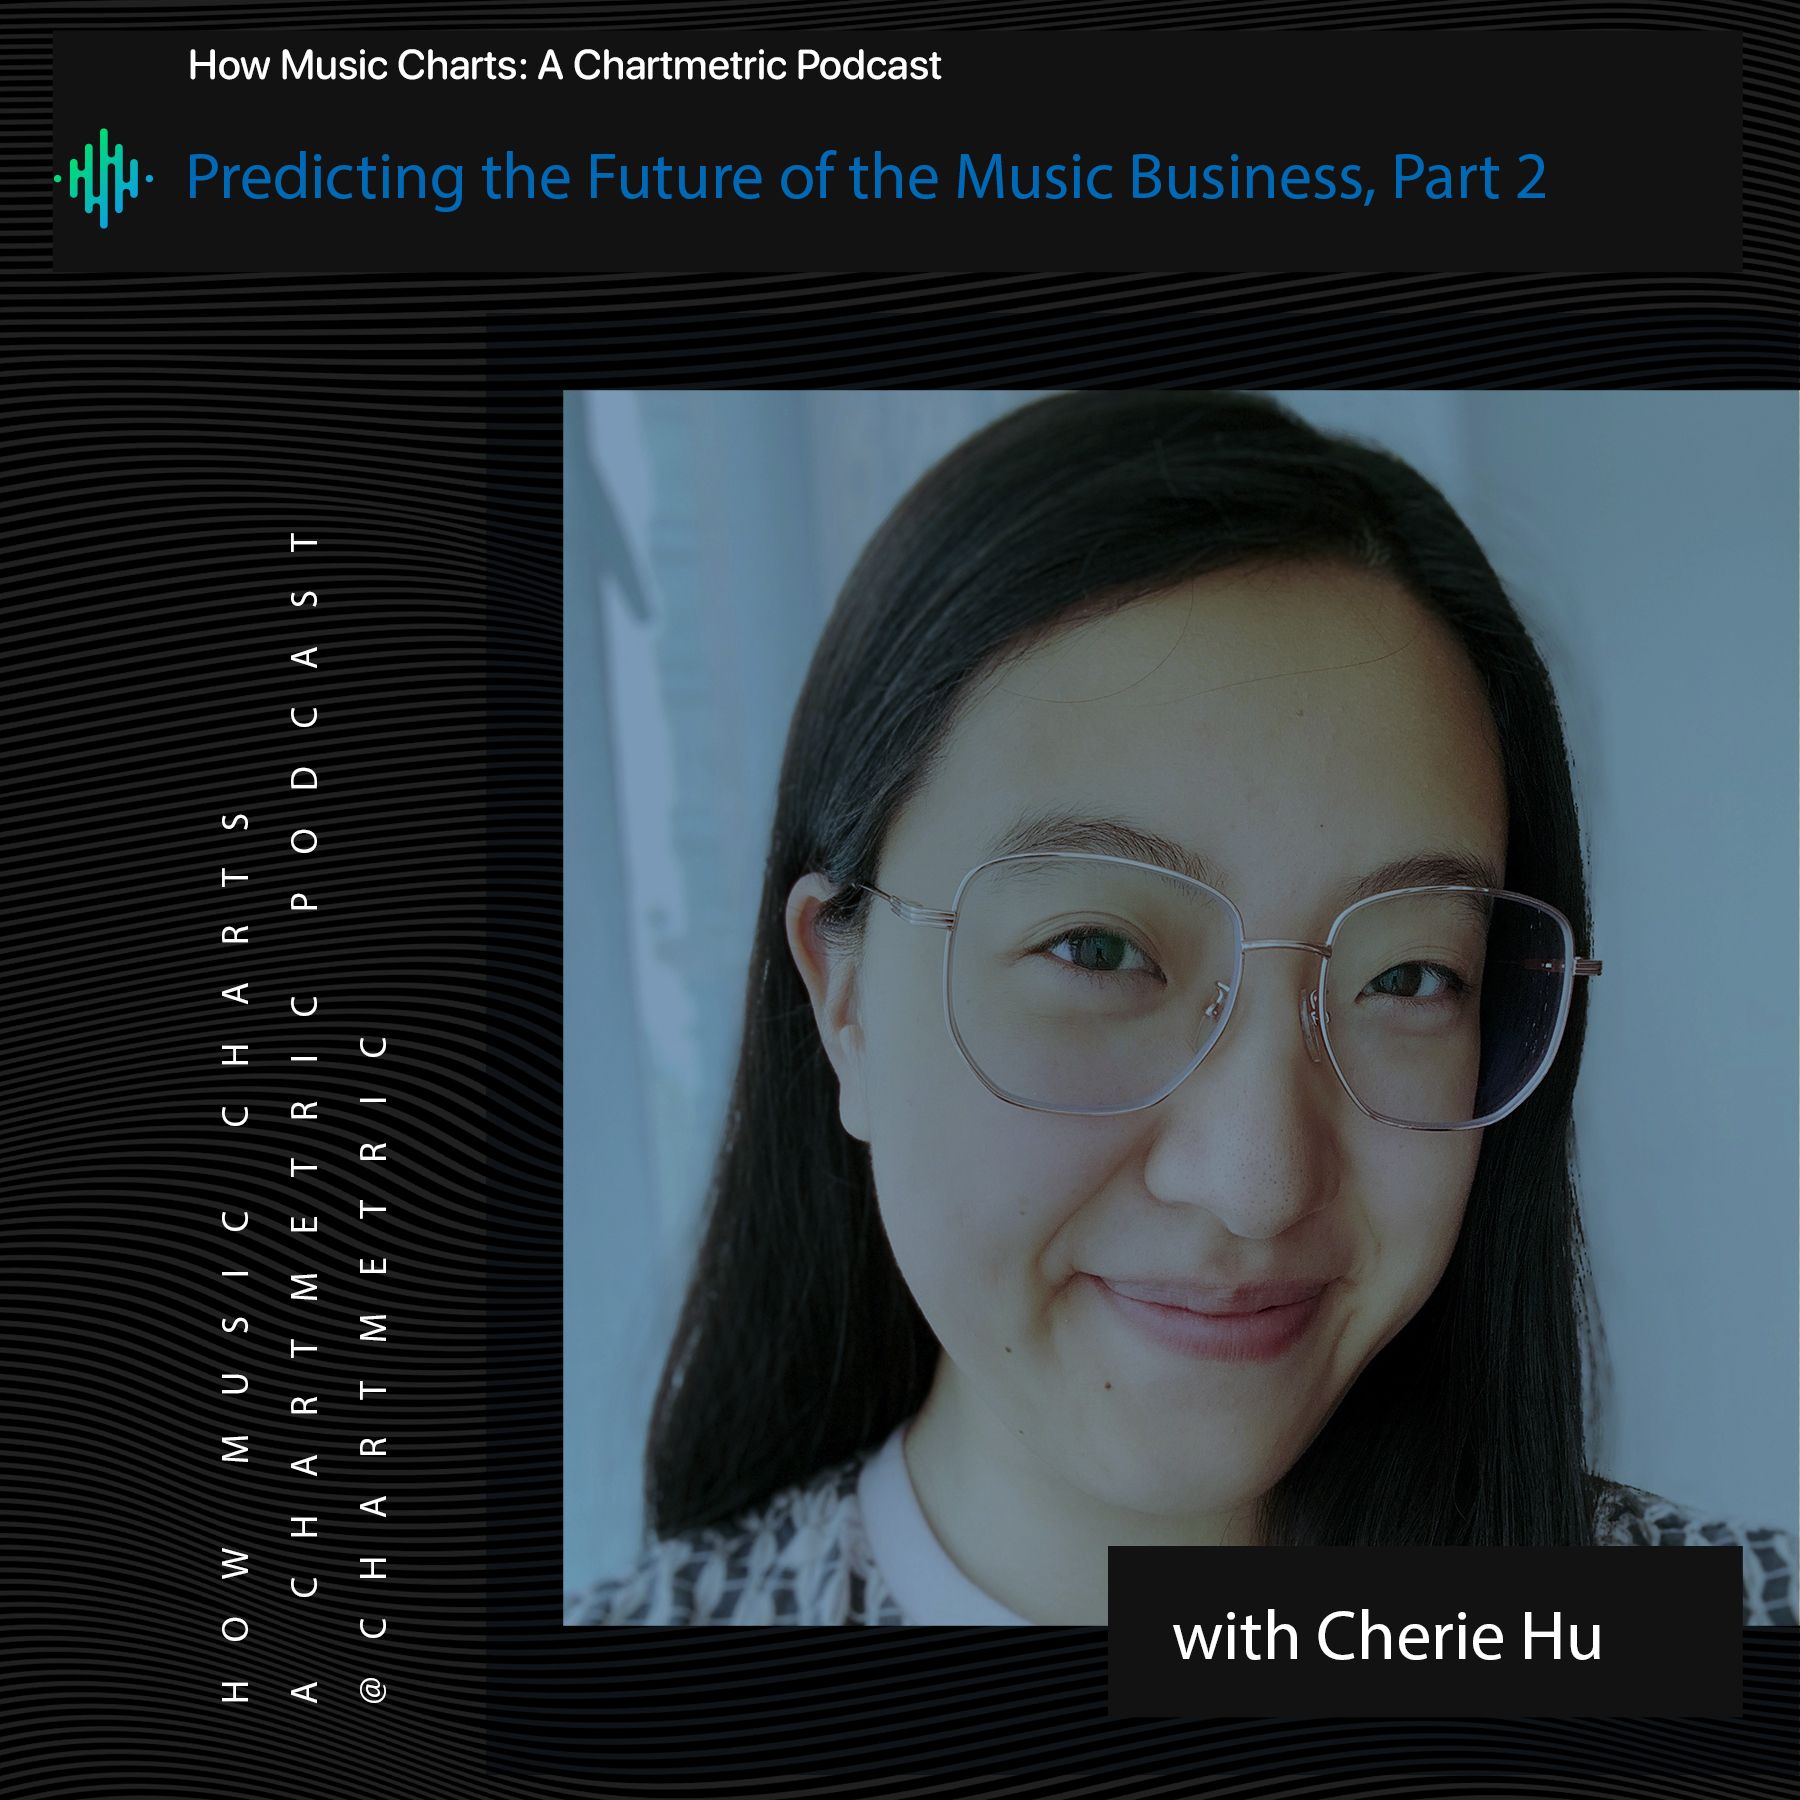 Predicting the Future of the Music Business With Cherie Hu, Part 2